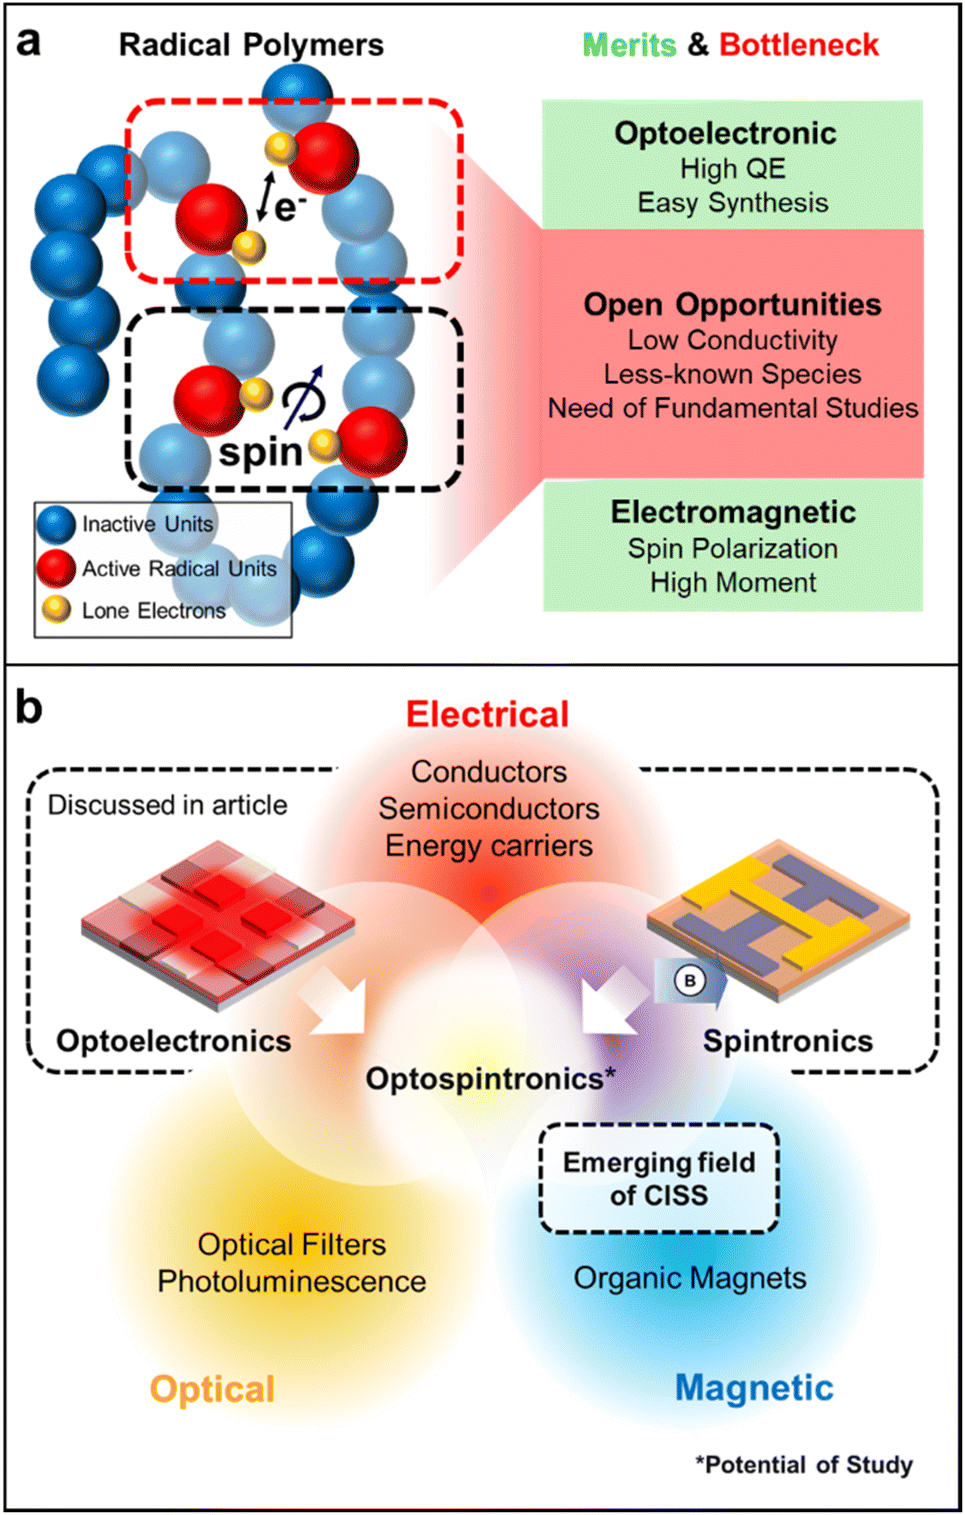 Radical polymers in optoelectronic and spintronic applications 